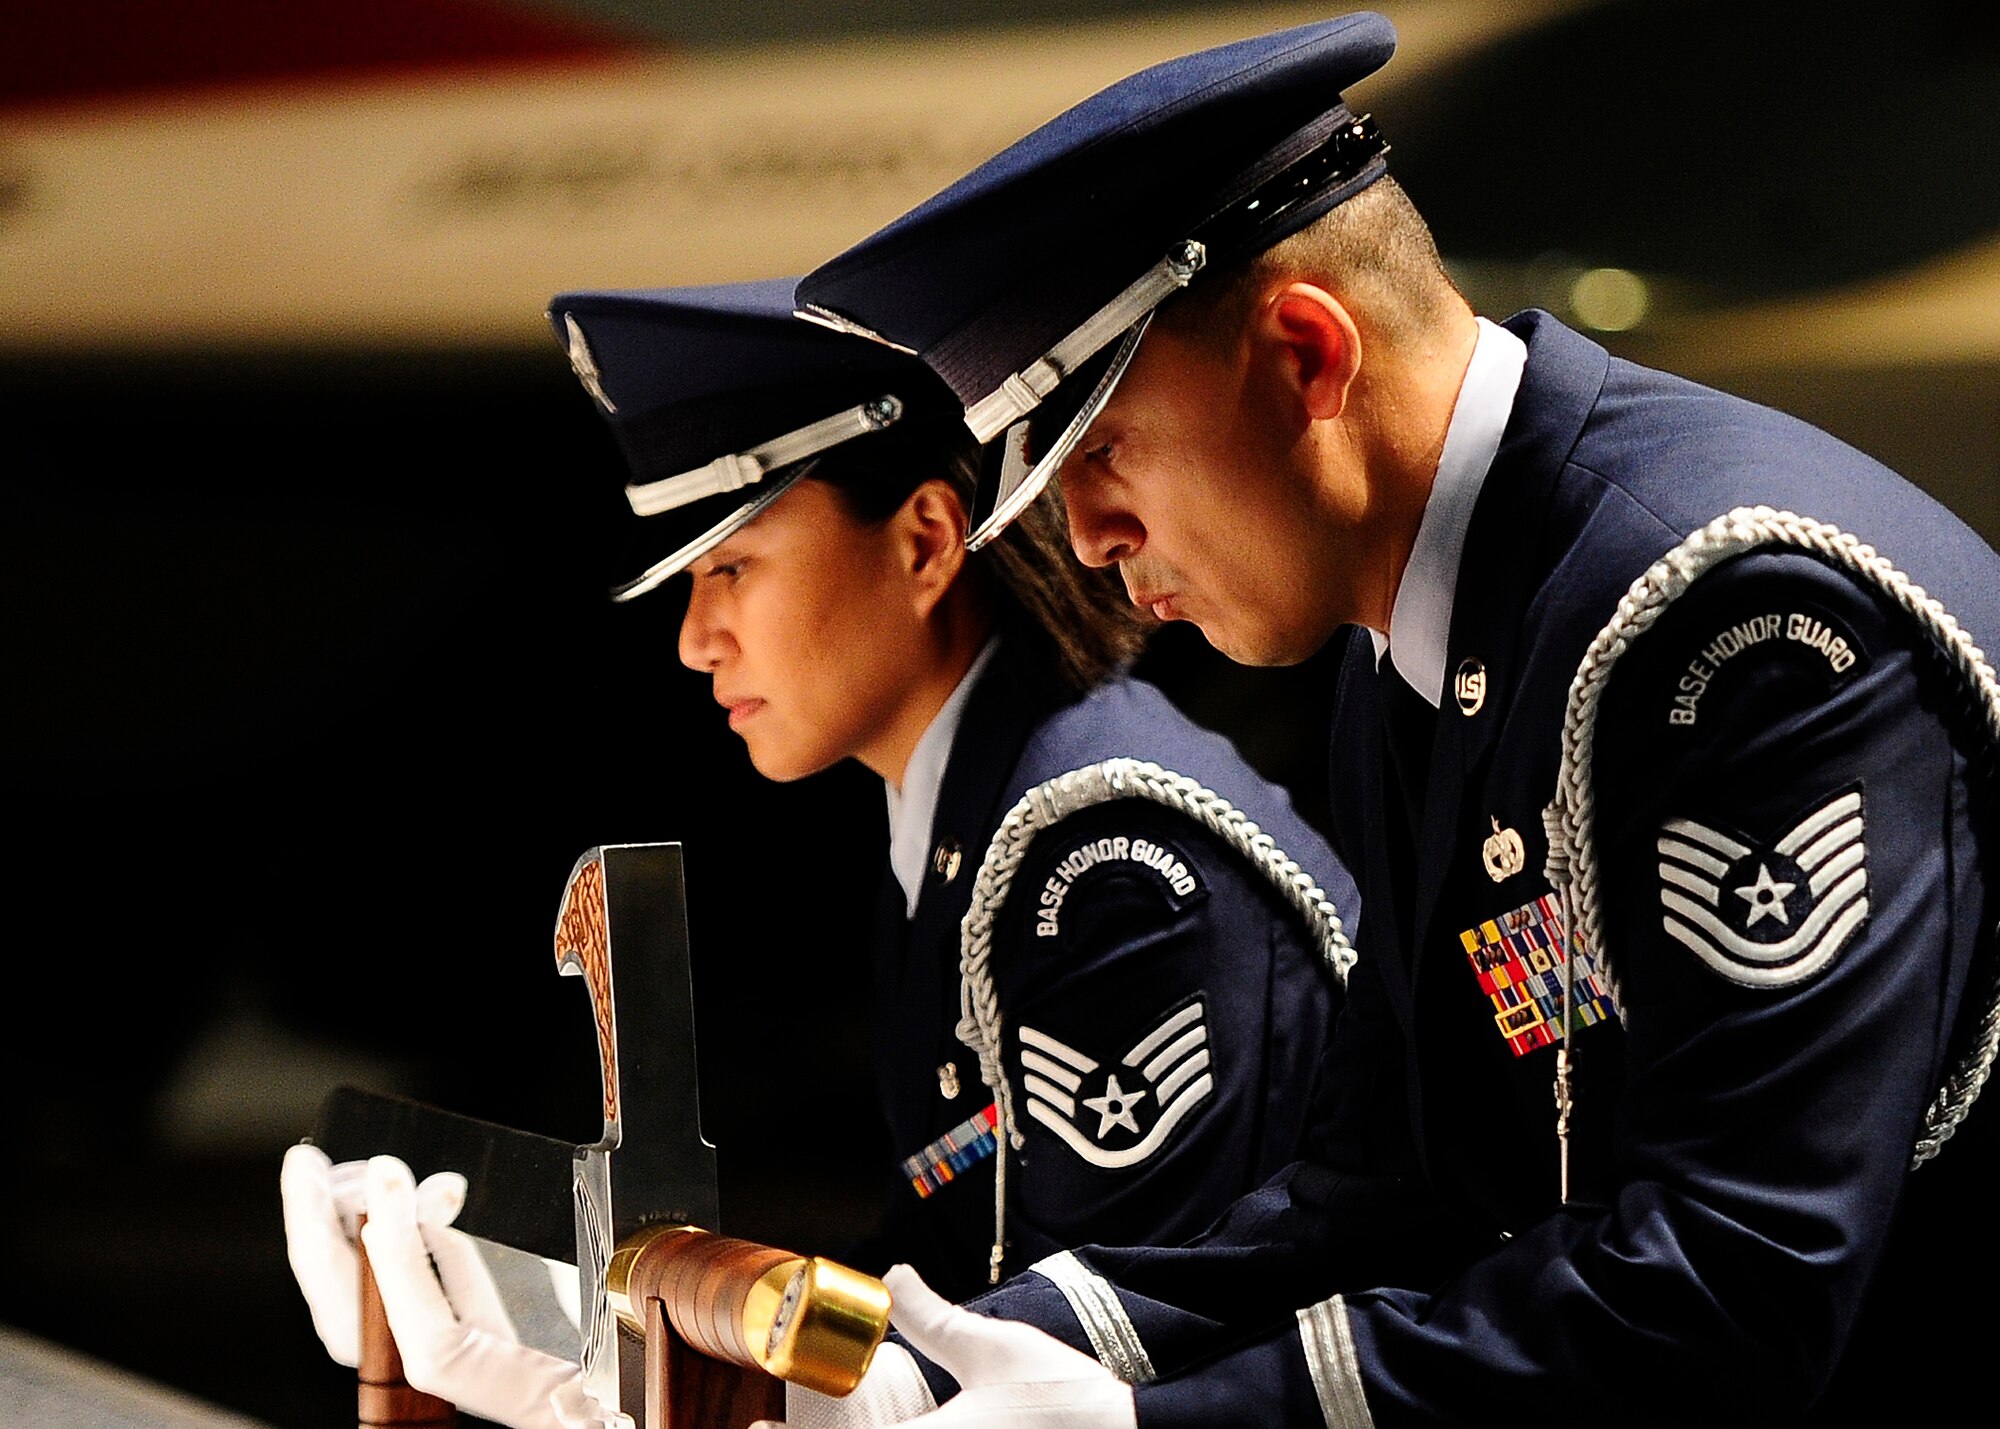 U.S. Air Force Honor Guard members Tech. Sgt. Juan Garcia and Staff Sgt. Annzen Salvador lift the sword used for the Order of the Sword ceremony at the Museum of Aviation in Warner Robins, Ga., July 13, 2016. The Order of the Sword is an honor awarded by the NCOs of a command to recognize individuals they hold in high esteem and for their contributions to the enlisted corps. (U.S. Air Force photo by Tech. Sgt. Stephen D. Schester)